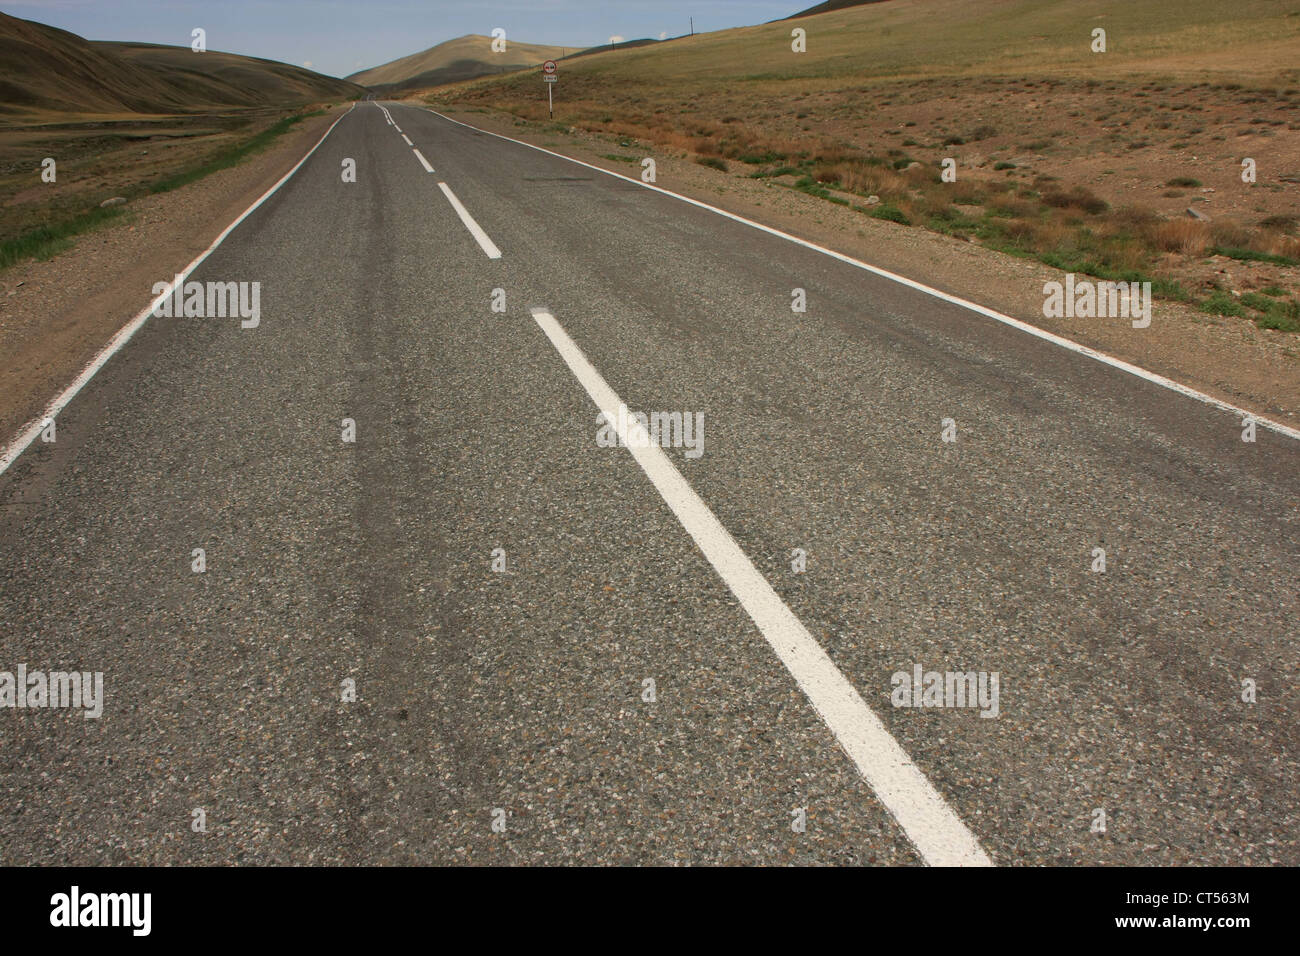 Paved international roadway between Russia and Mongolia Stock Photo